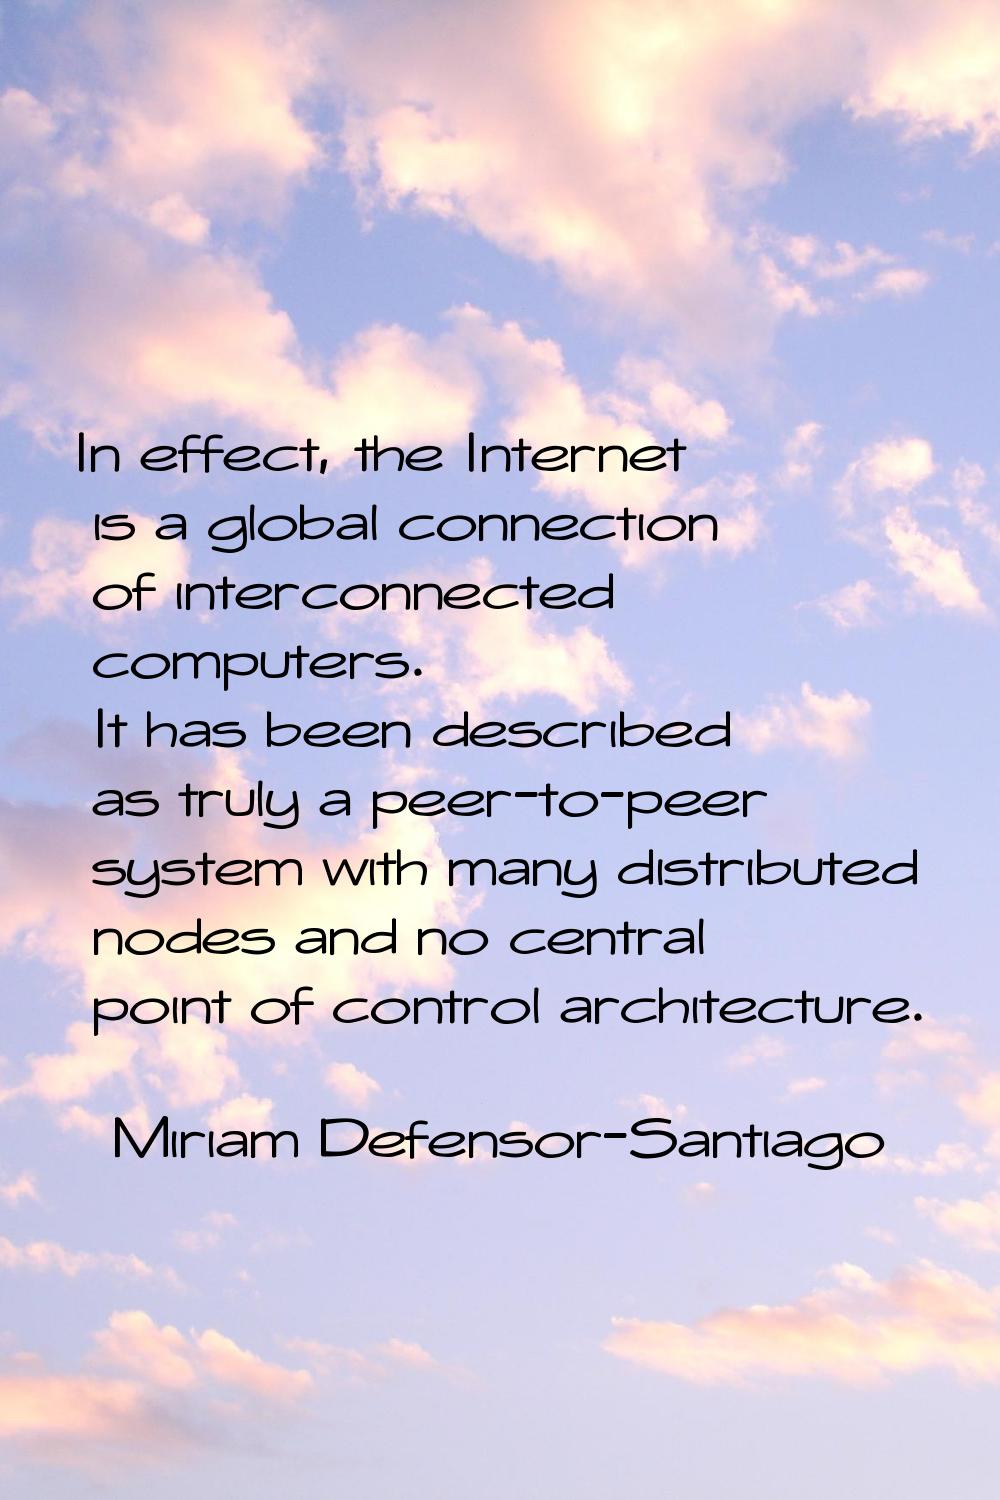 In effect, the Internet is a global connection of interconnected computers. It has been described a